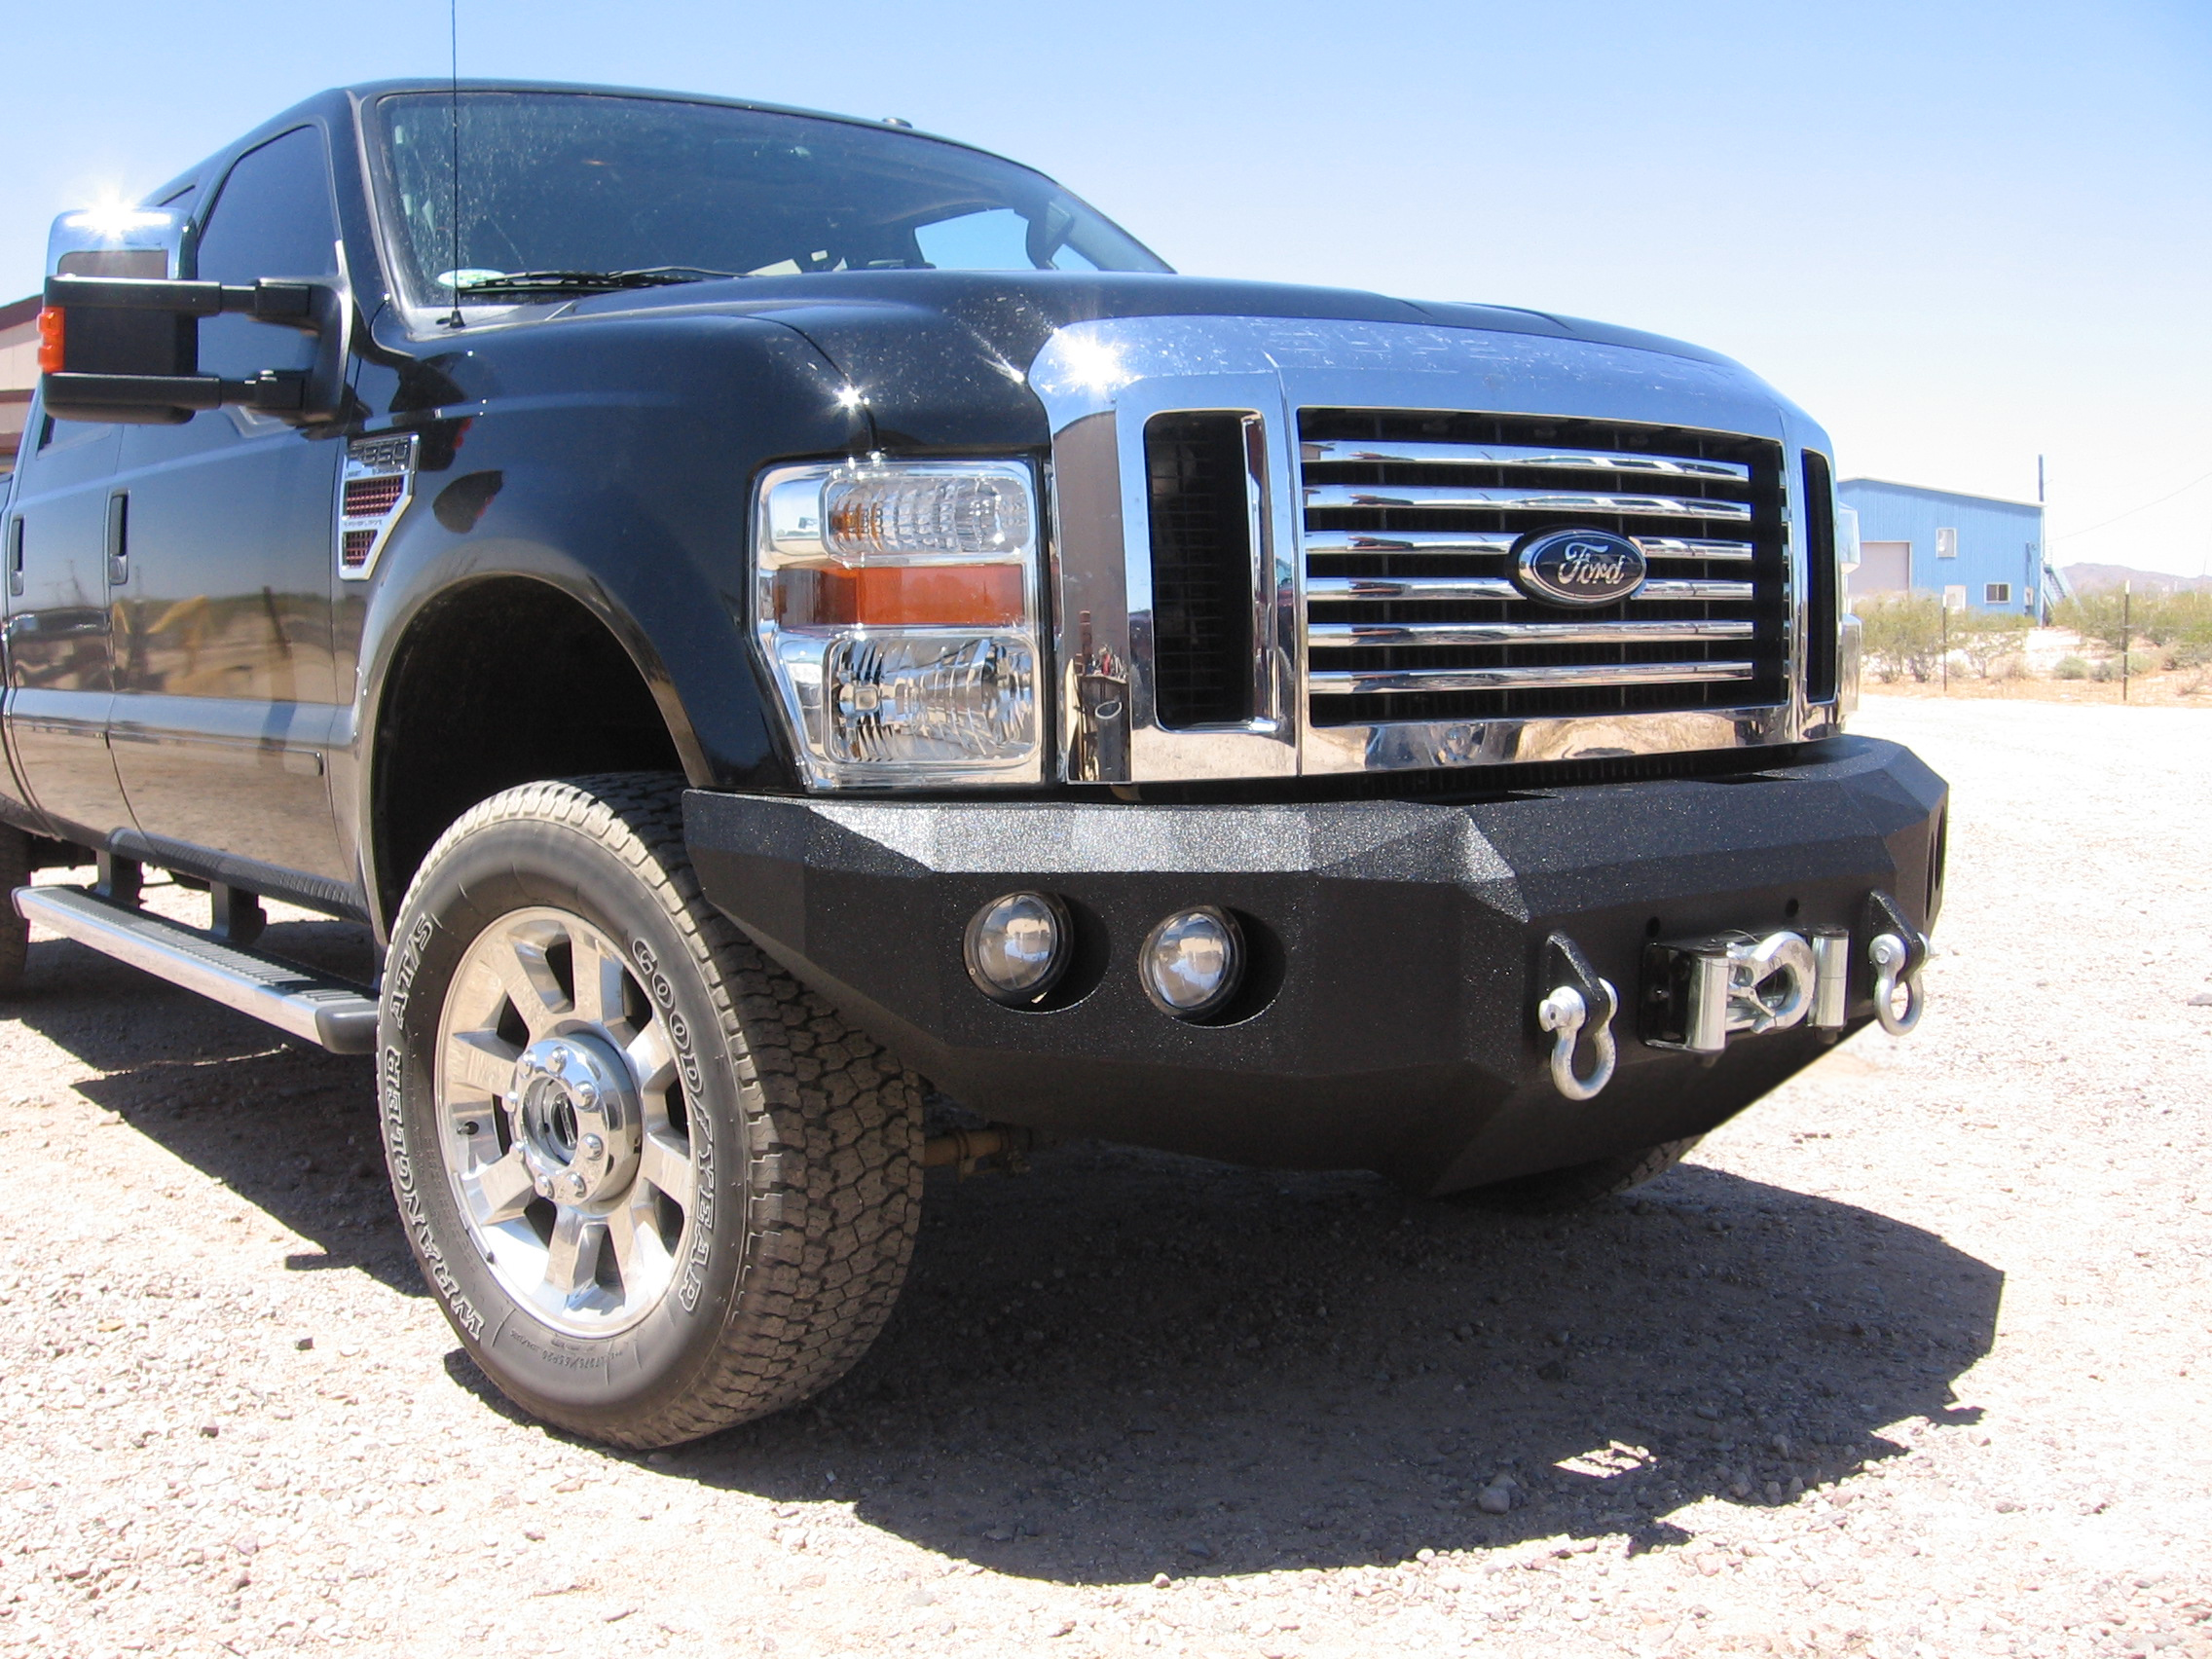 08-10 Ford F250 front base bumper